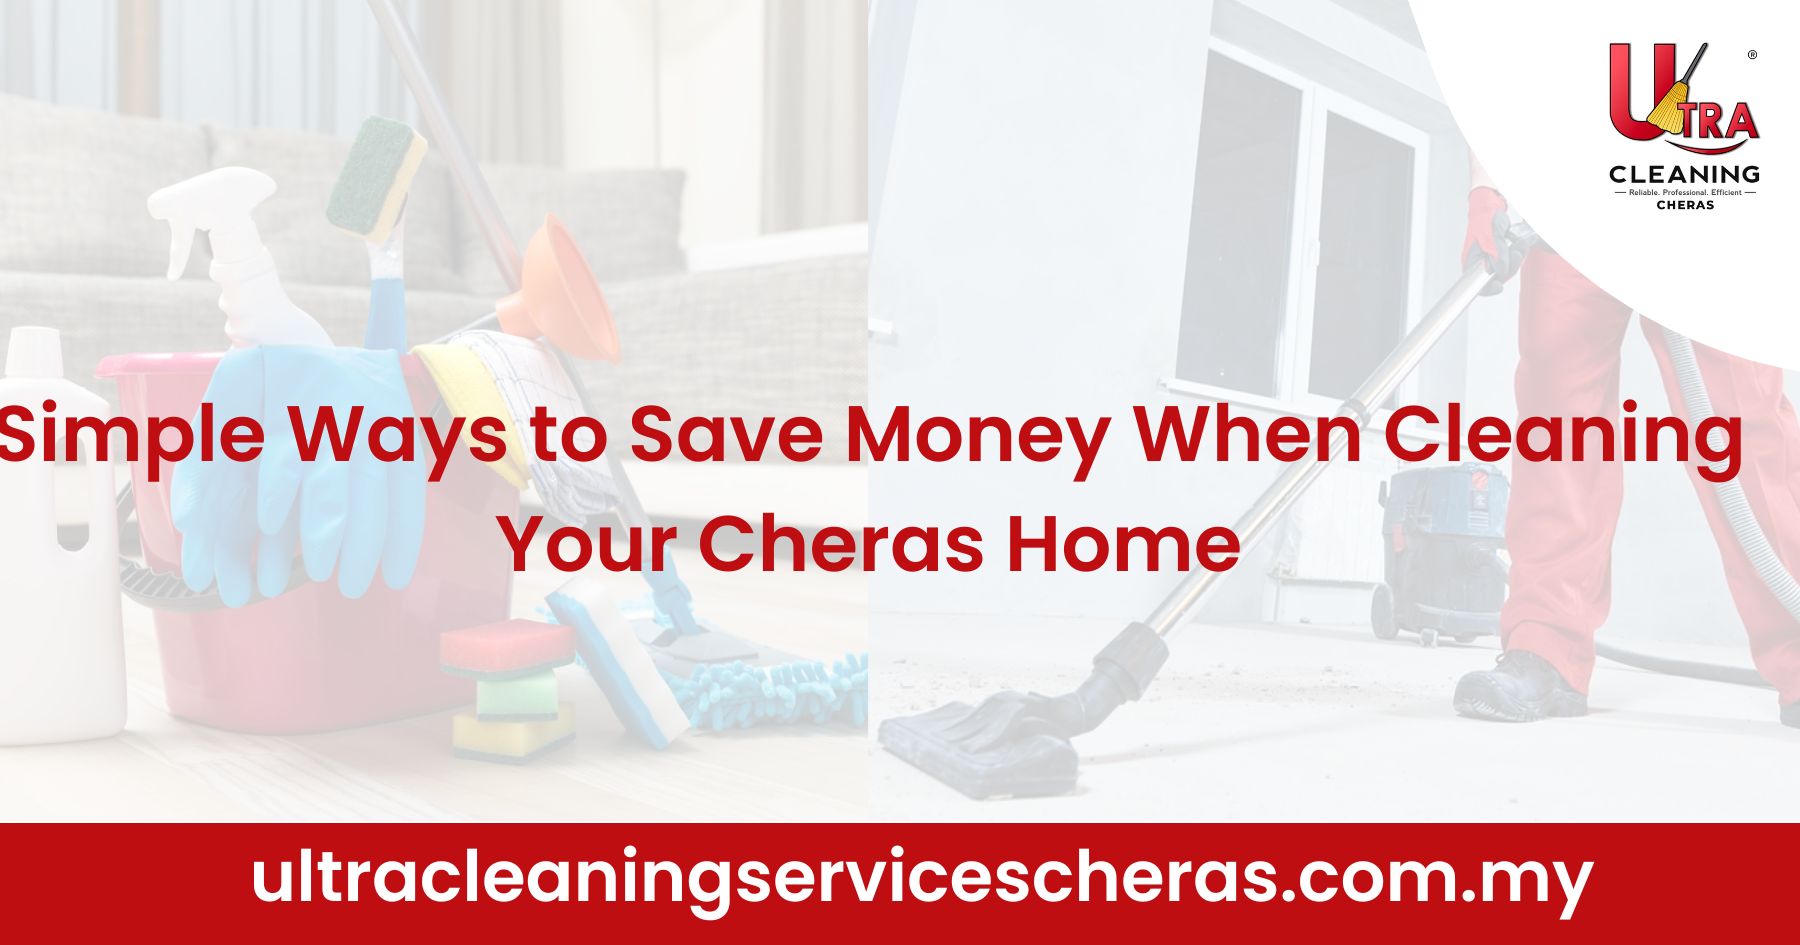 Simple Ways to Save Money When Cleaning Your Cheras Home